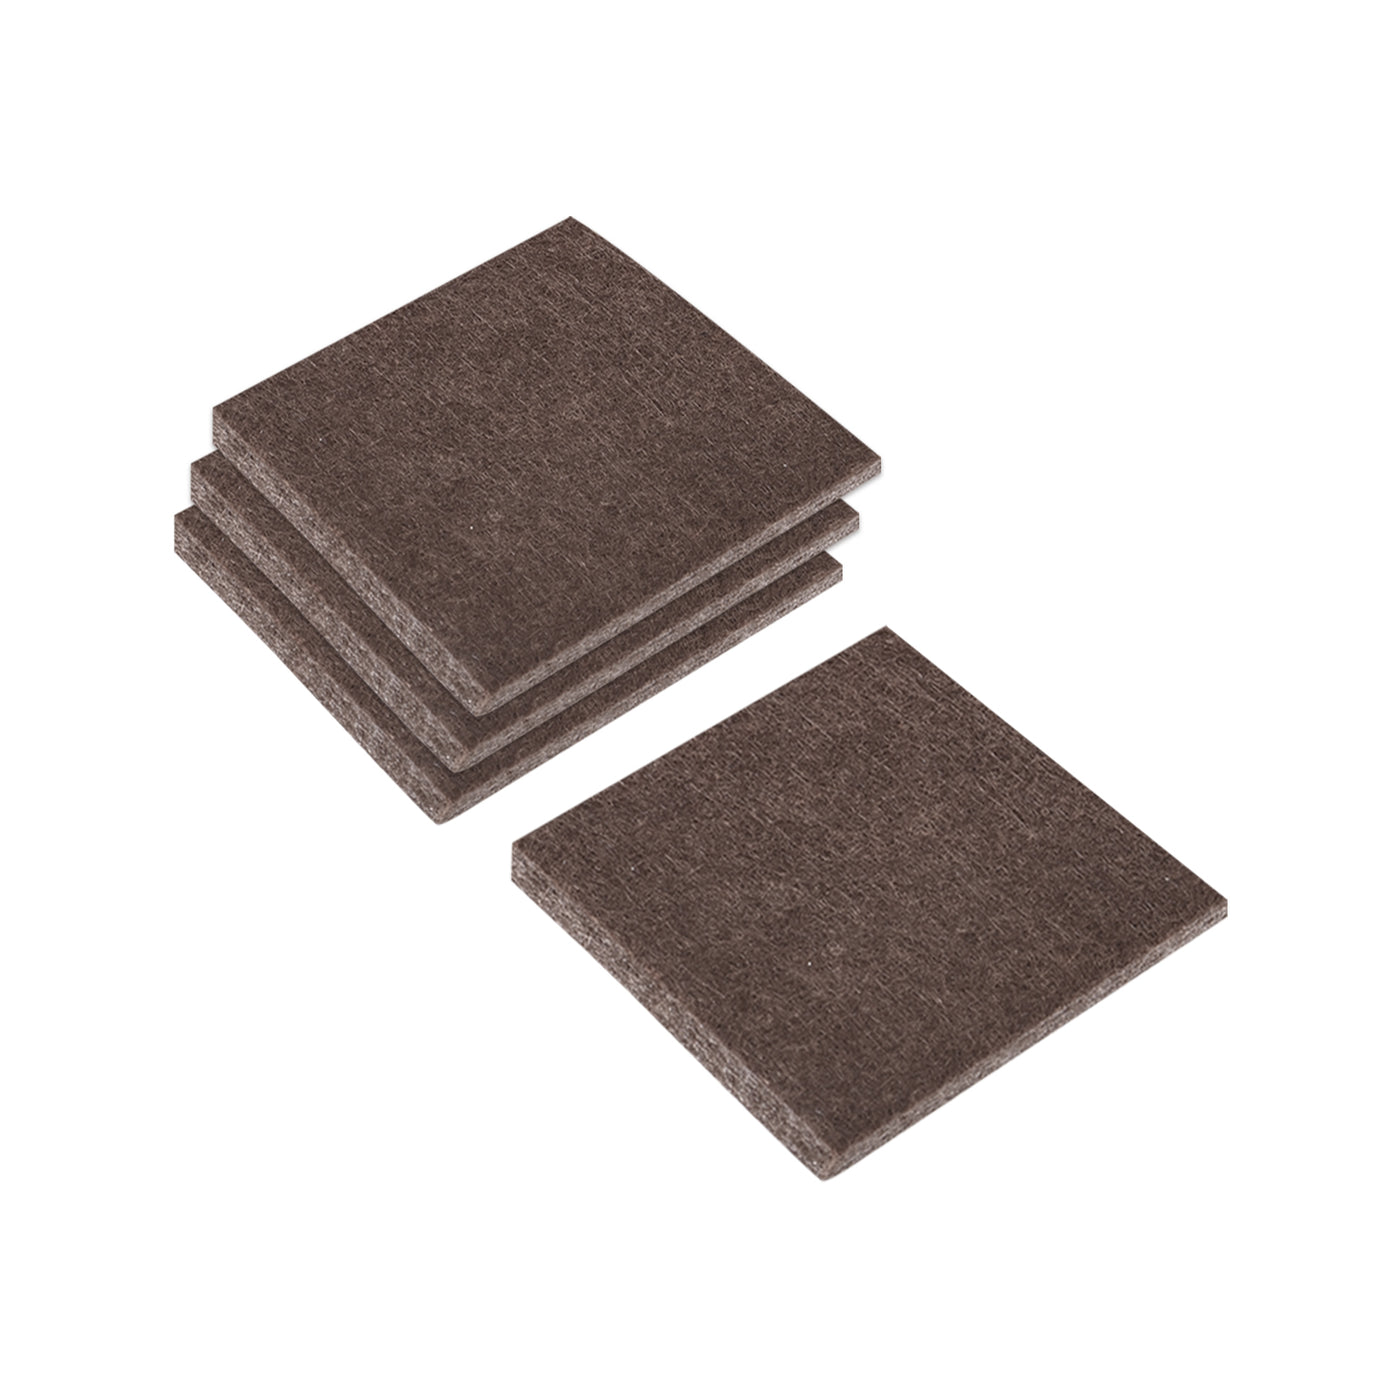 uxcell Uxcell Felt Furniture Pads, 50mm x 50mm Self Adhesive Square Floor Protectors for Furniture Legs Hardwood Floor, Brown 48Pcs